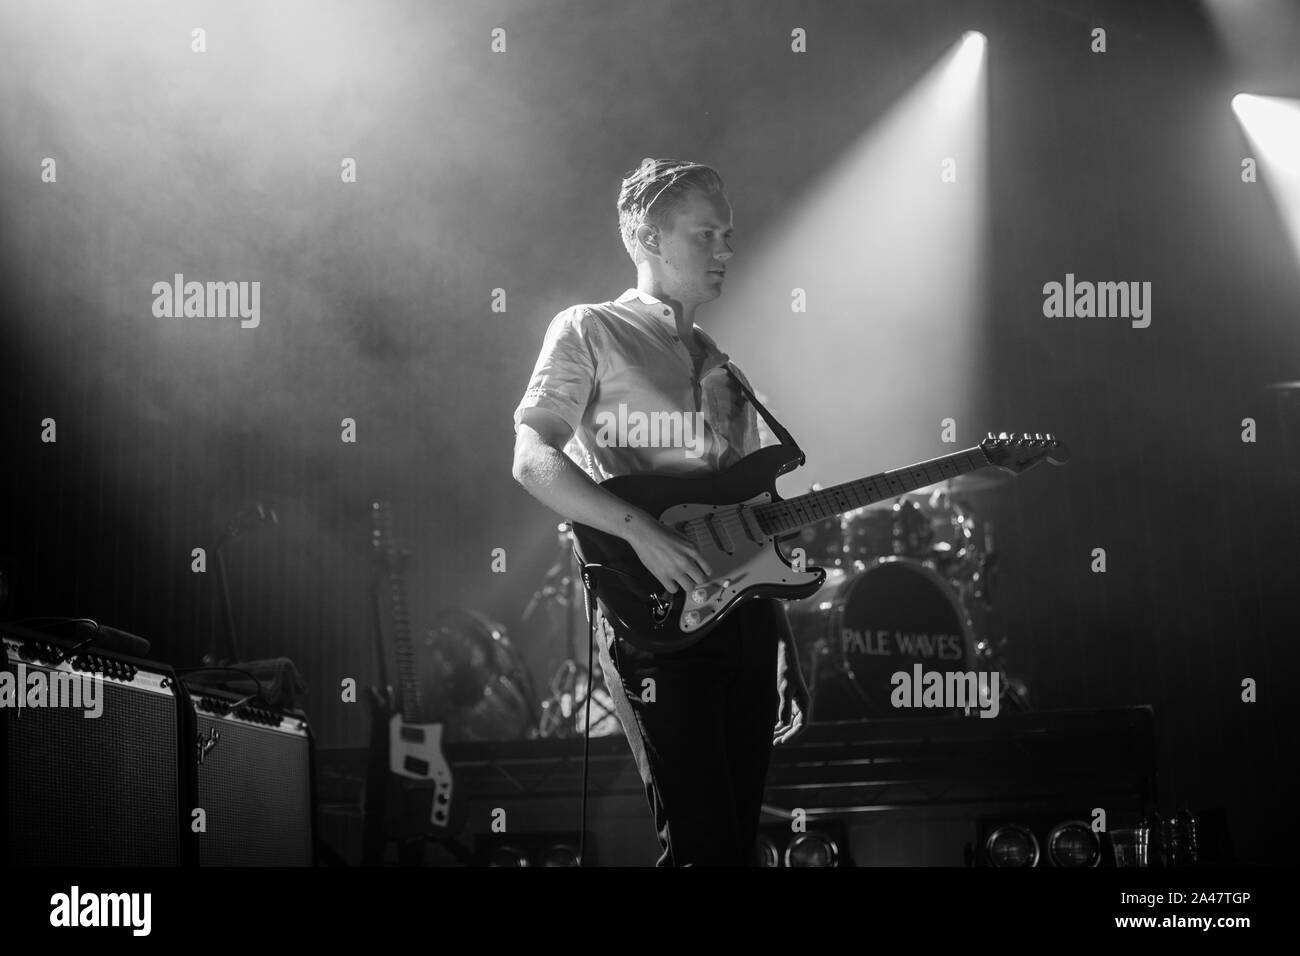 Pales Waves live at Manchester academy September 2019 Stock Photo